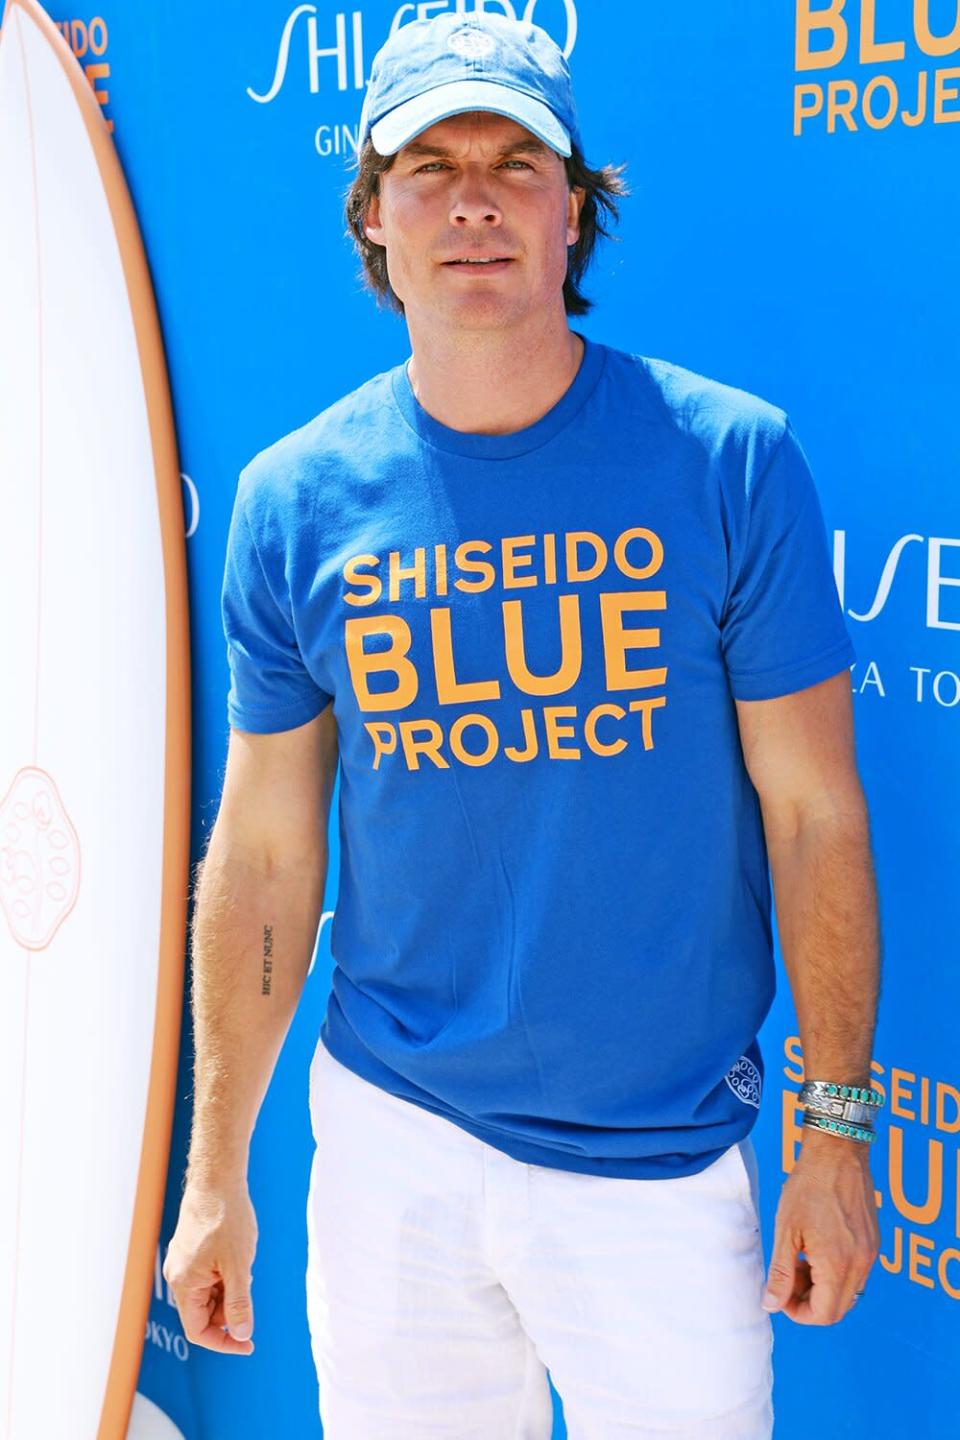 Ian Somerhalder hosts The Shiseido Blue Project in partnership with World S= urf League Pure and WILDCOAST at the U.S Open of Surfing, CA on August 4th,= 2022 in Huntington Beach, California. https://jenniferjohnsonphotography91.pixieset.com/sbpxis/